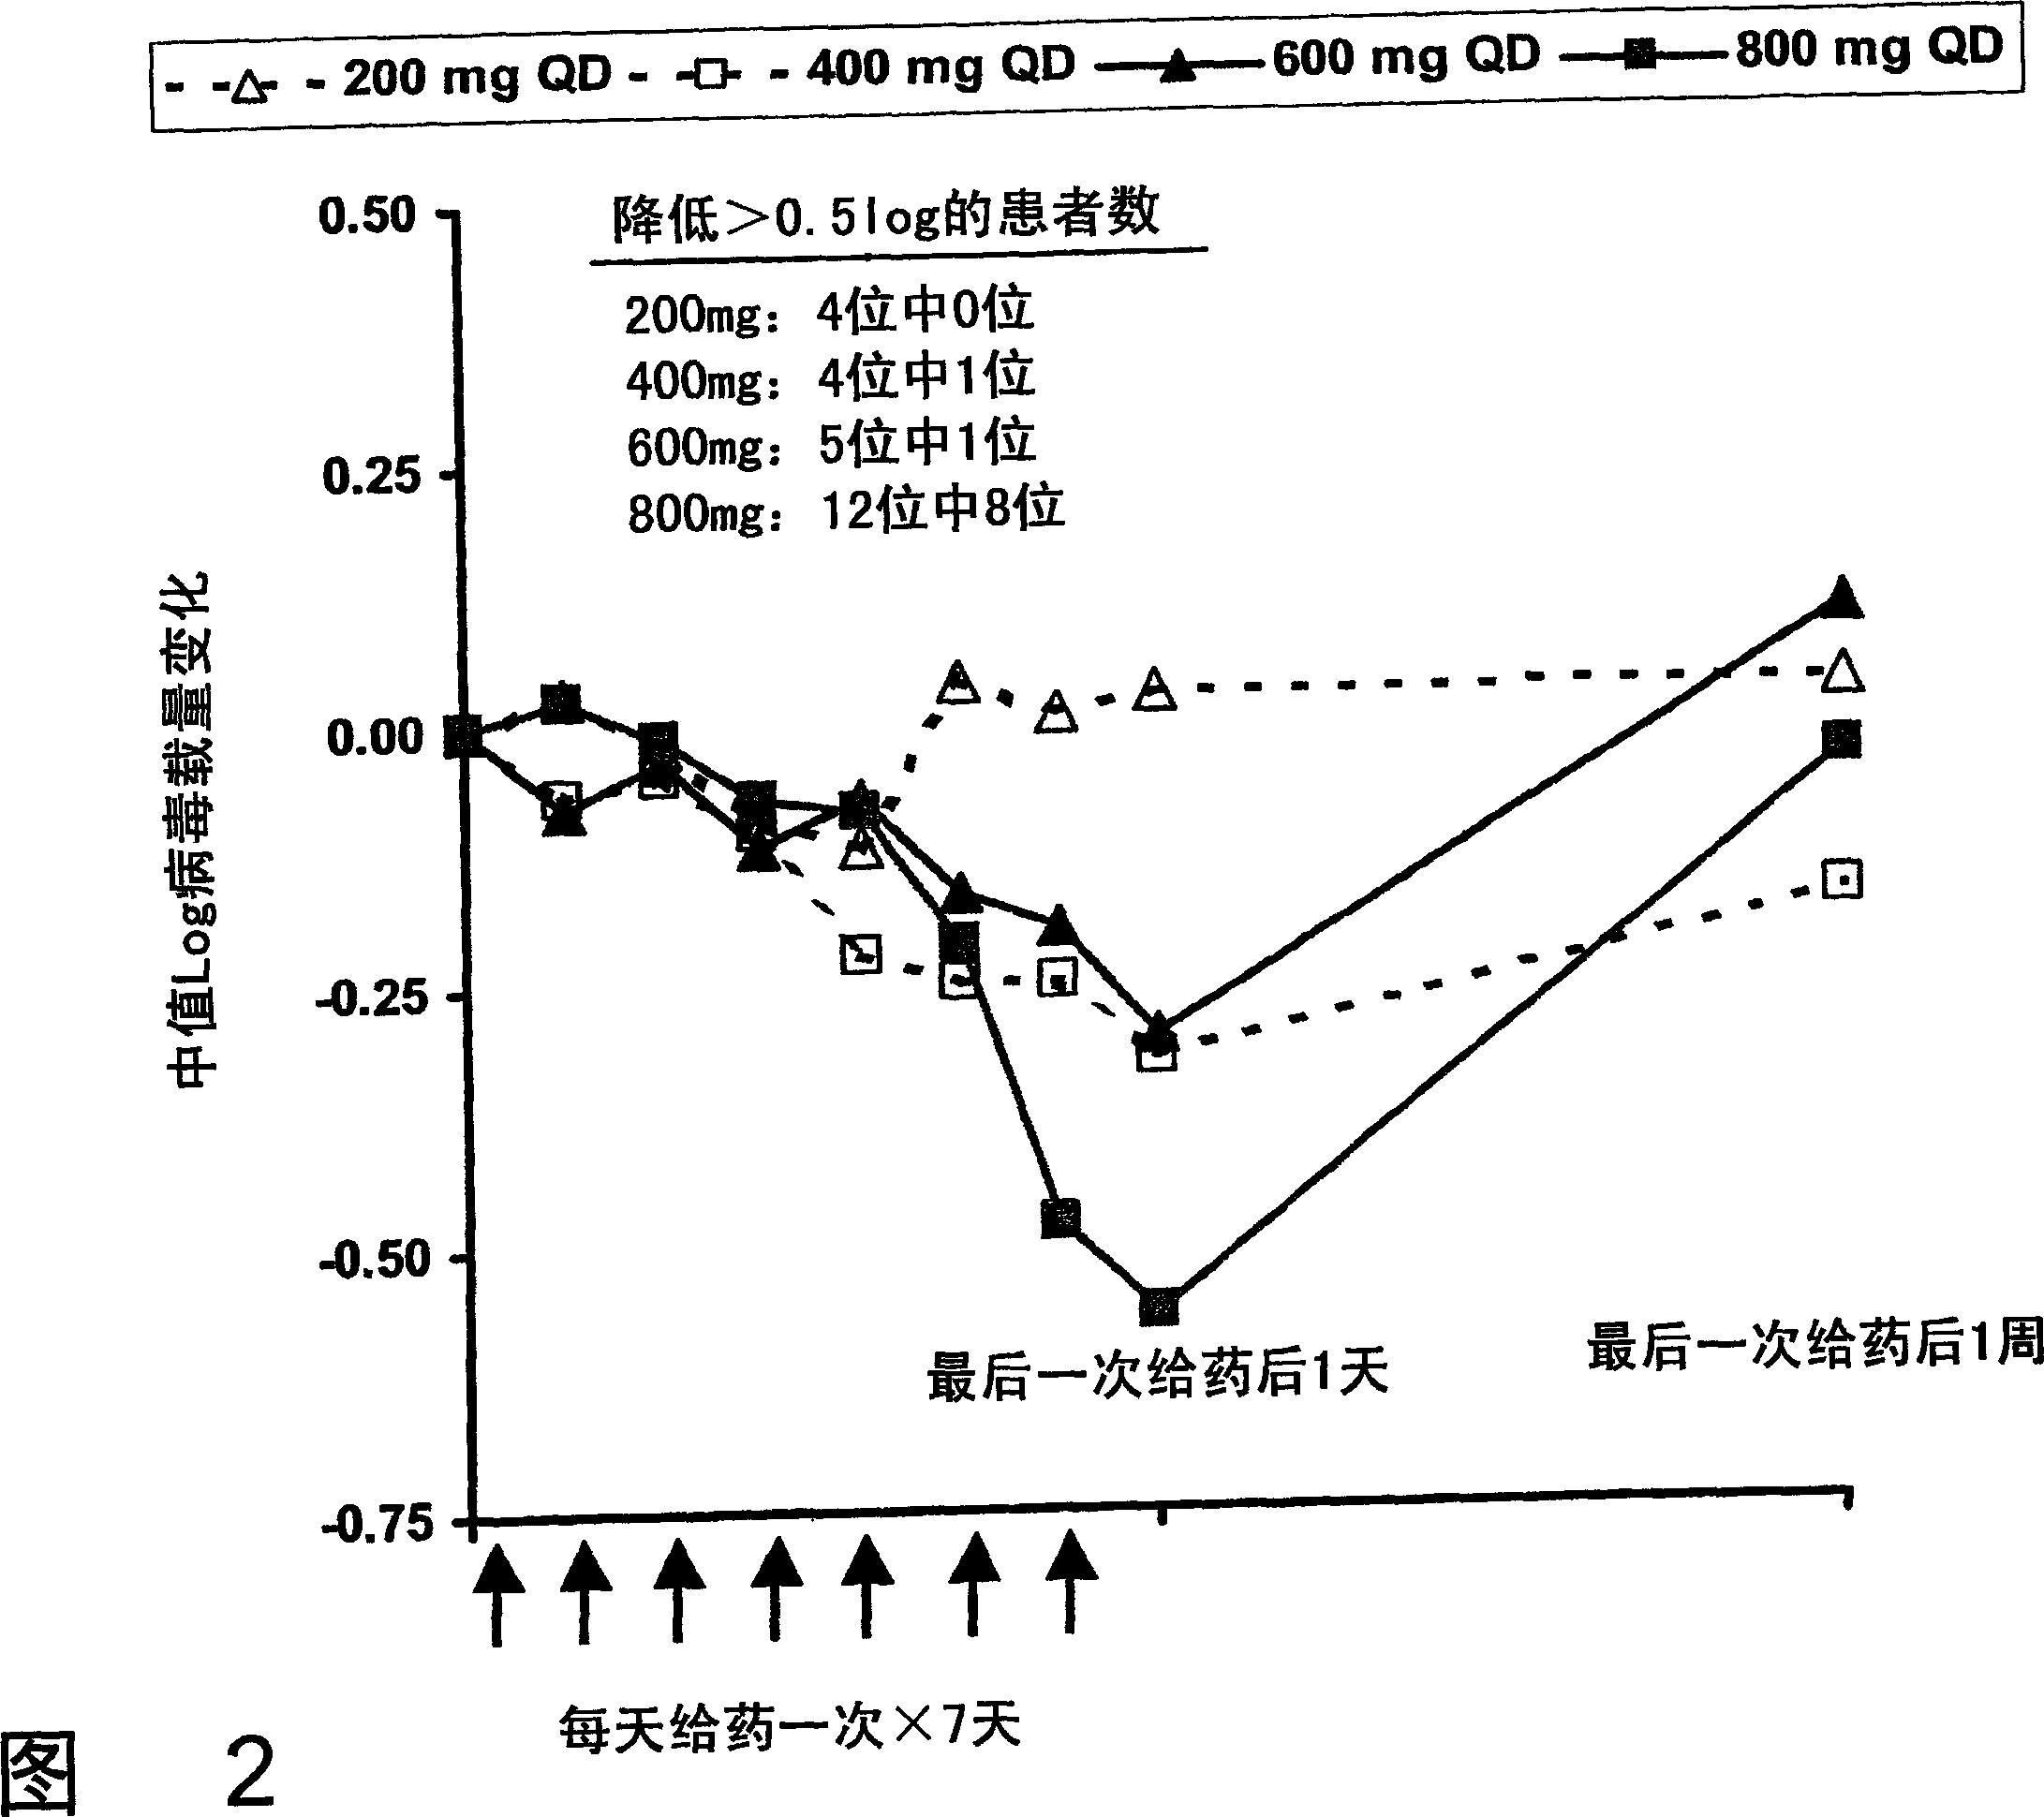 Administration of TLR7 ligands and prodrugs thereof for treatment of infection by hepatitis c virus